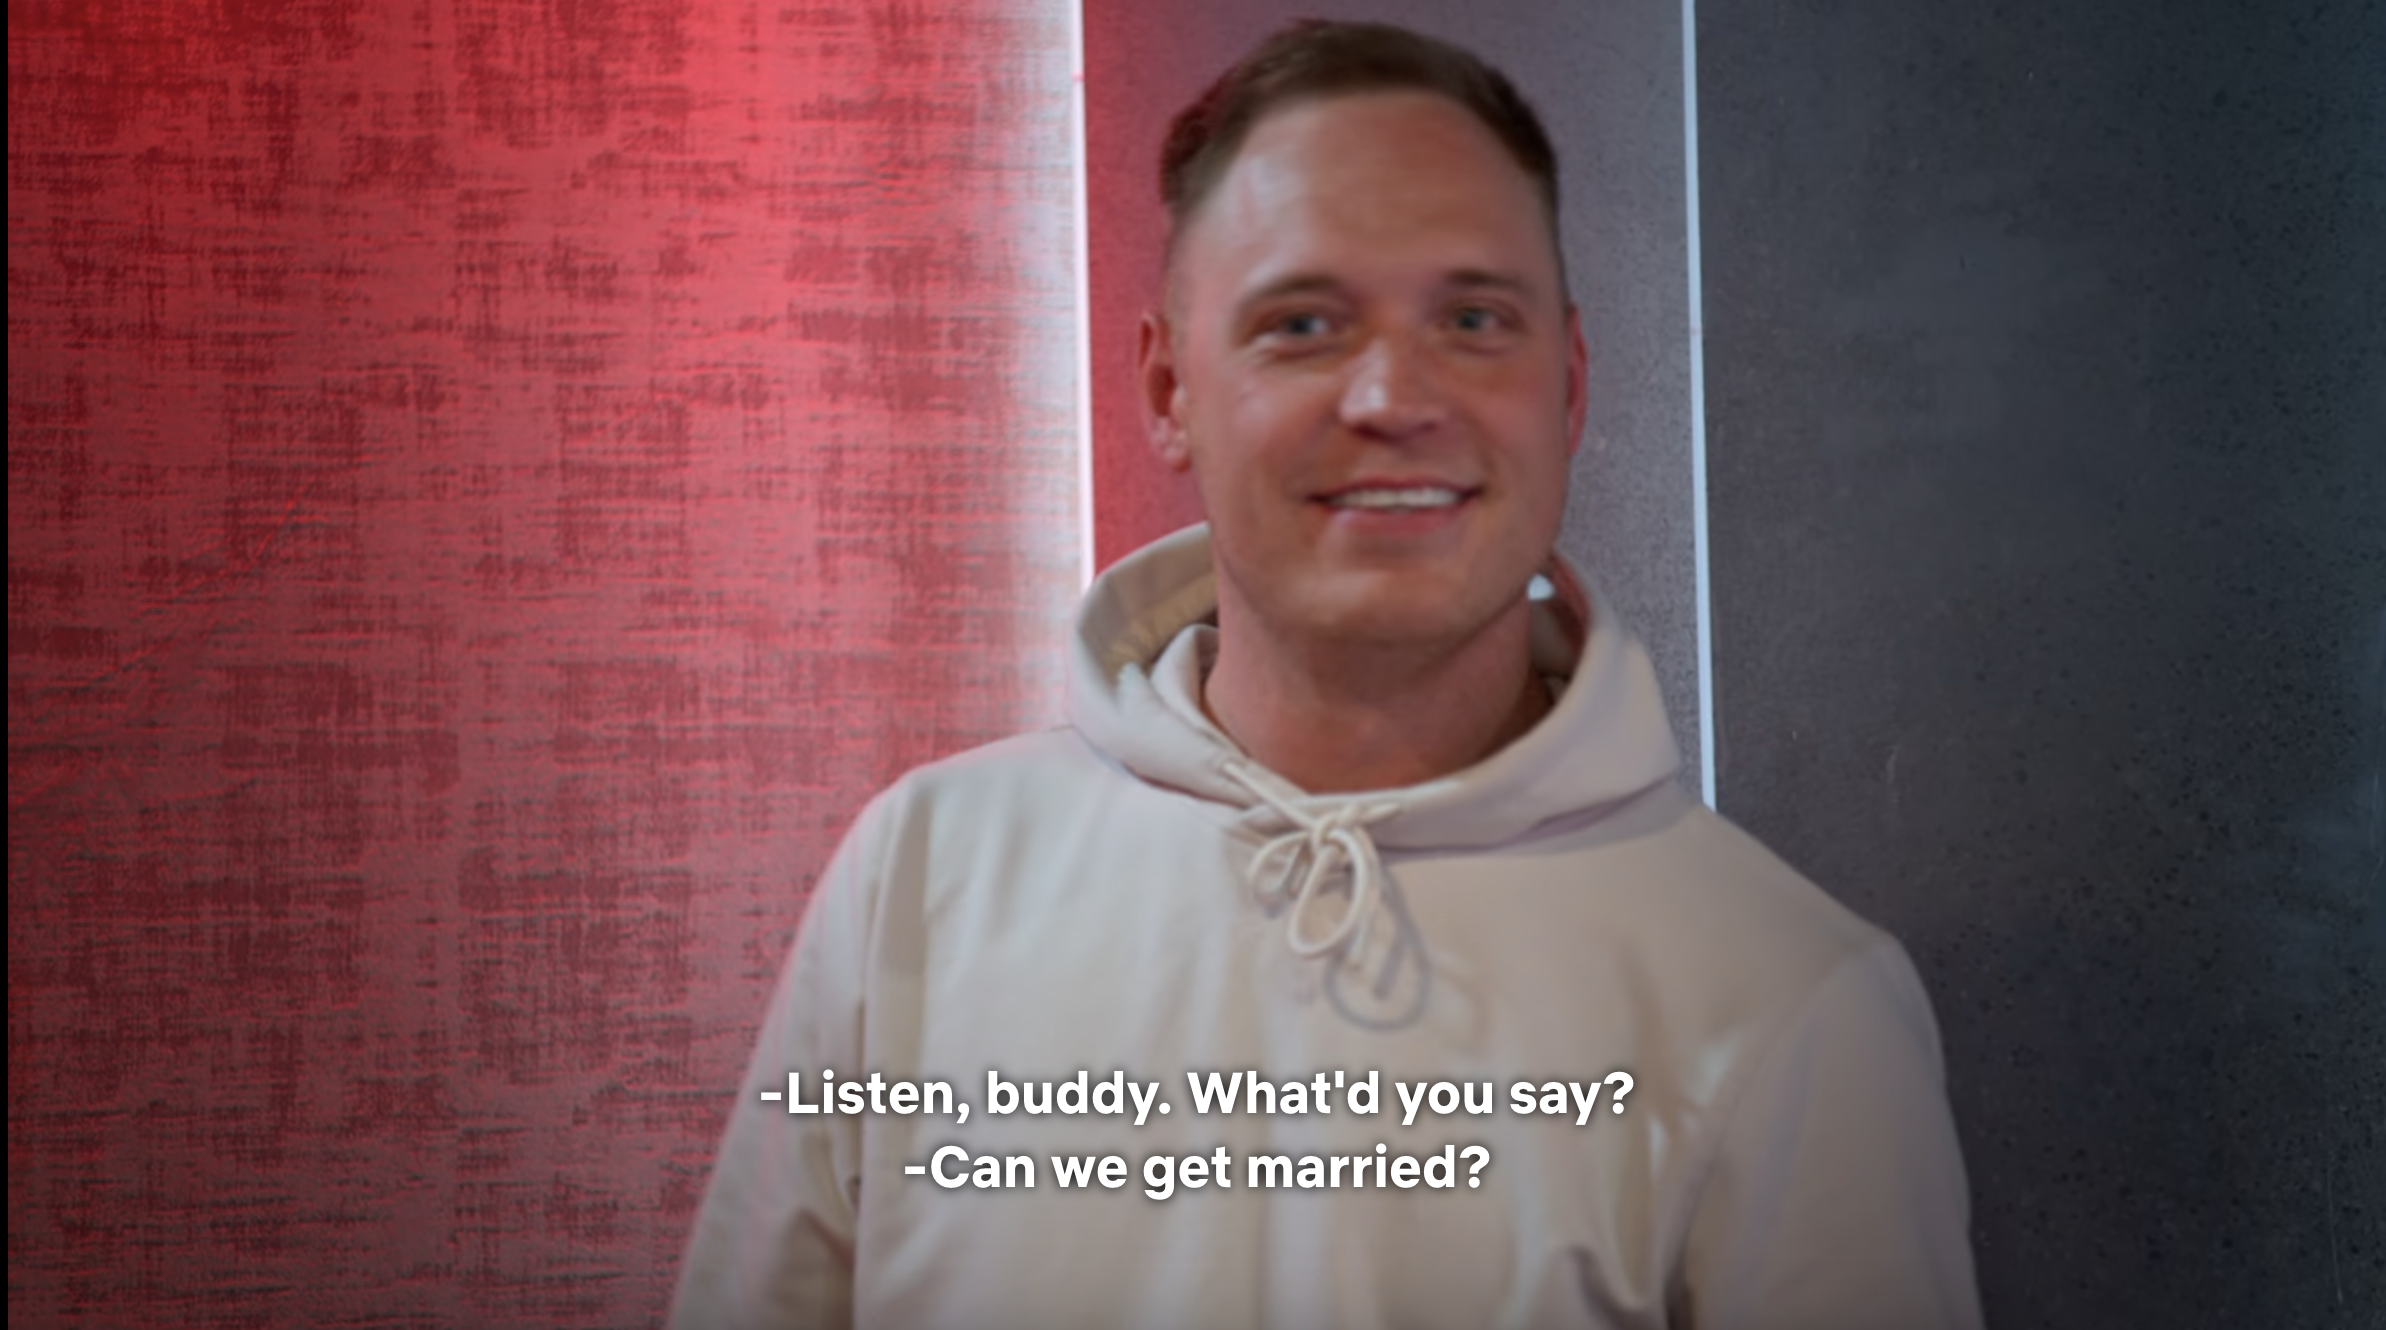 Man in hoodie smiling with subtitles &quot;Listen, buddy. What you say? Can we get married?&quot;